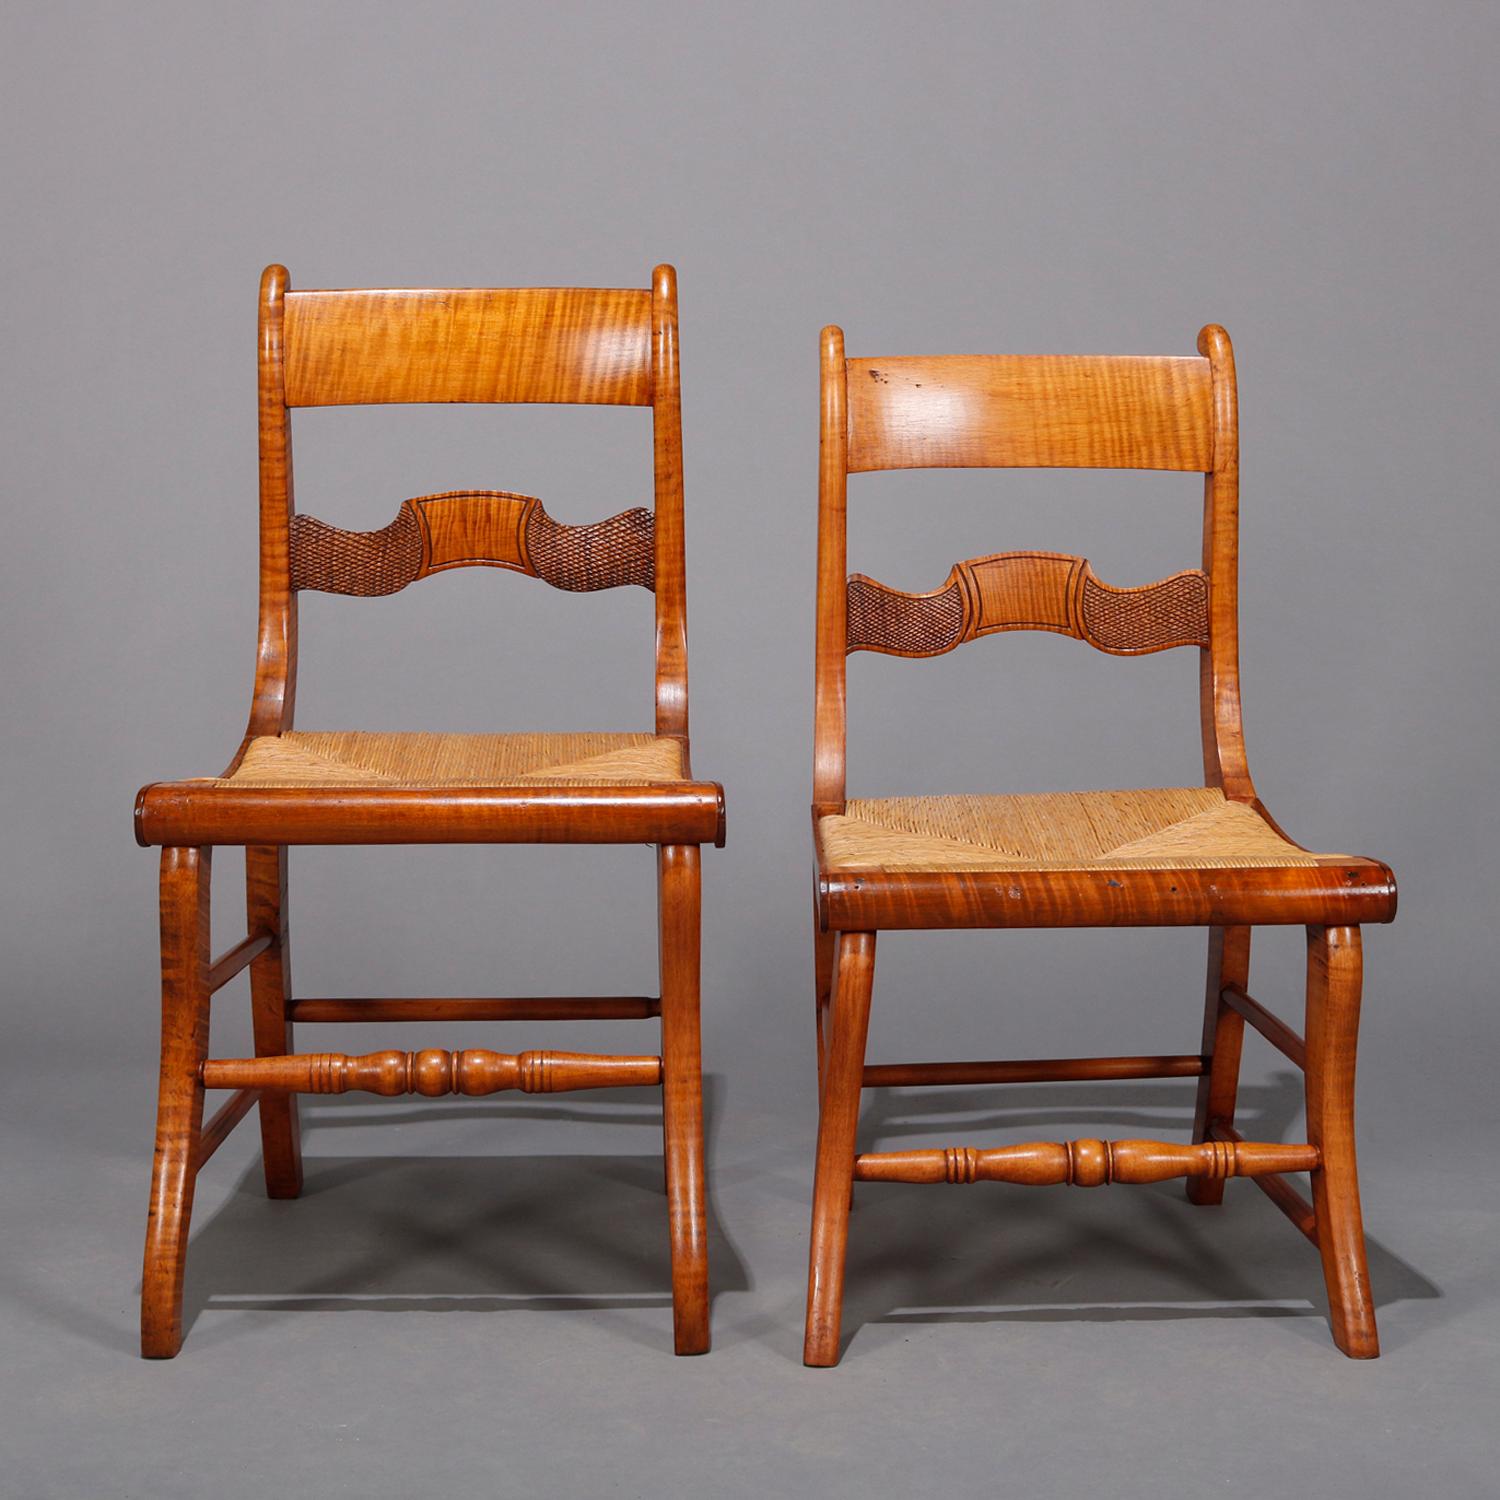 A set of 8 antique dining chairs offers deeply striated tiger maple construction with scrolled and shaped ladder backs over rush seats, handmade with some variation in size as photographed, circa 1860.

***DELIVERY NOTICE – Due to COVID-19 we are